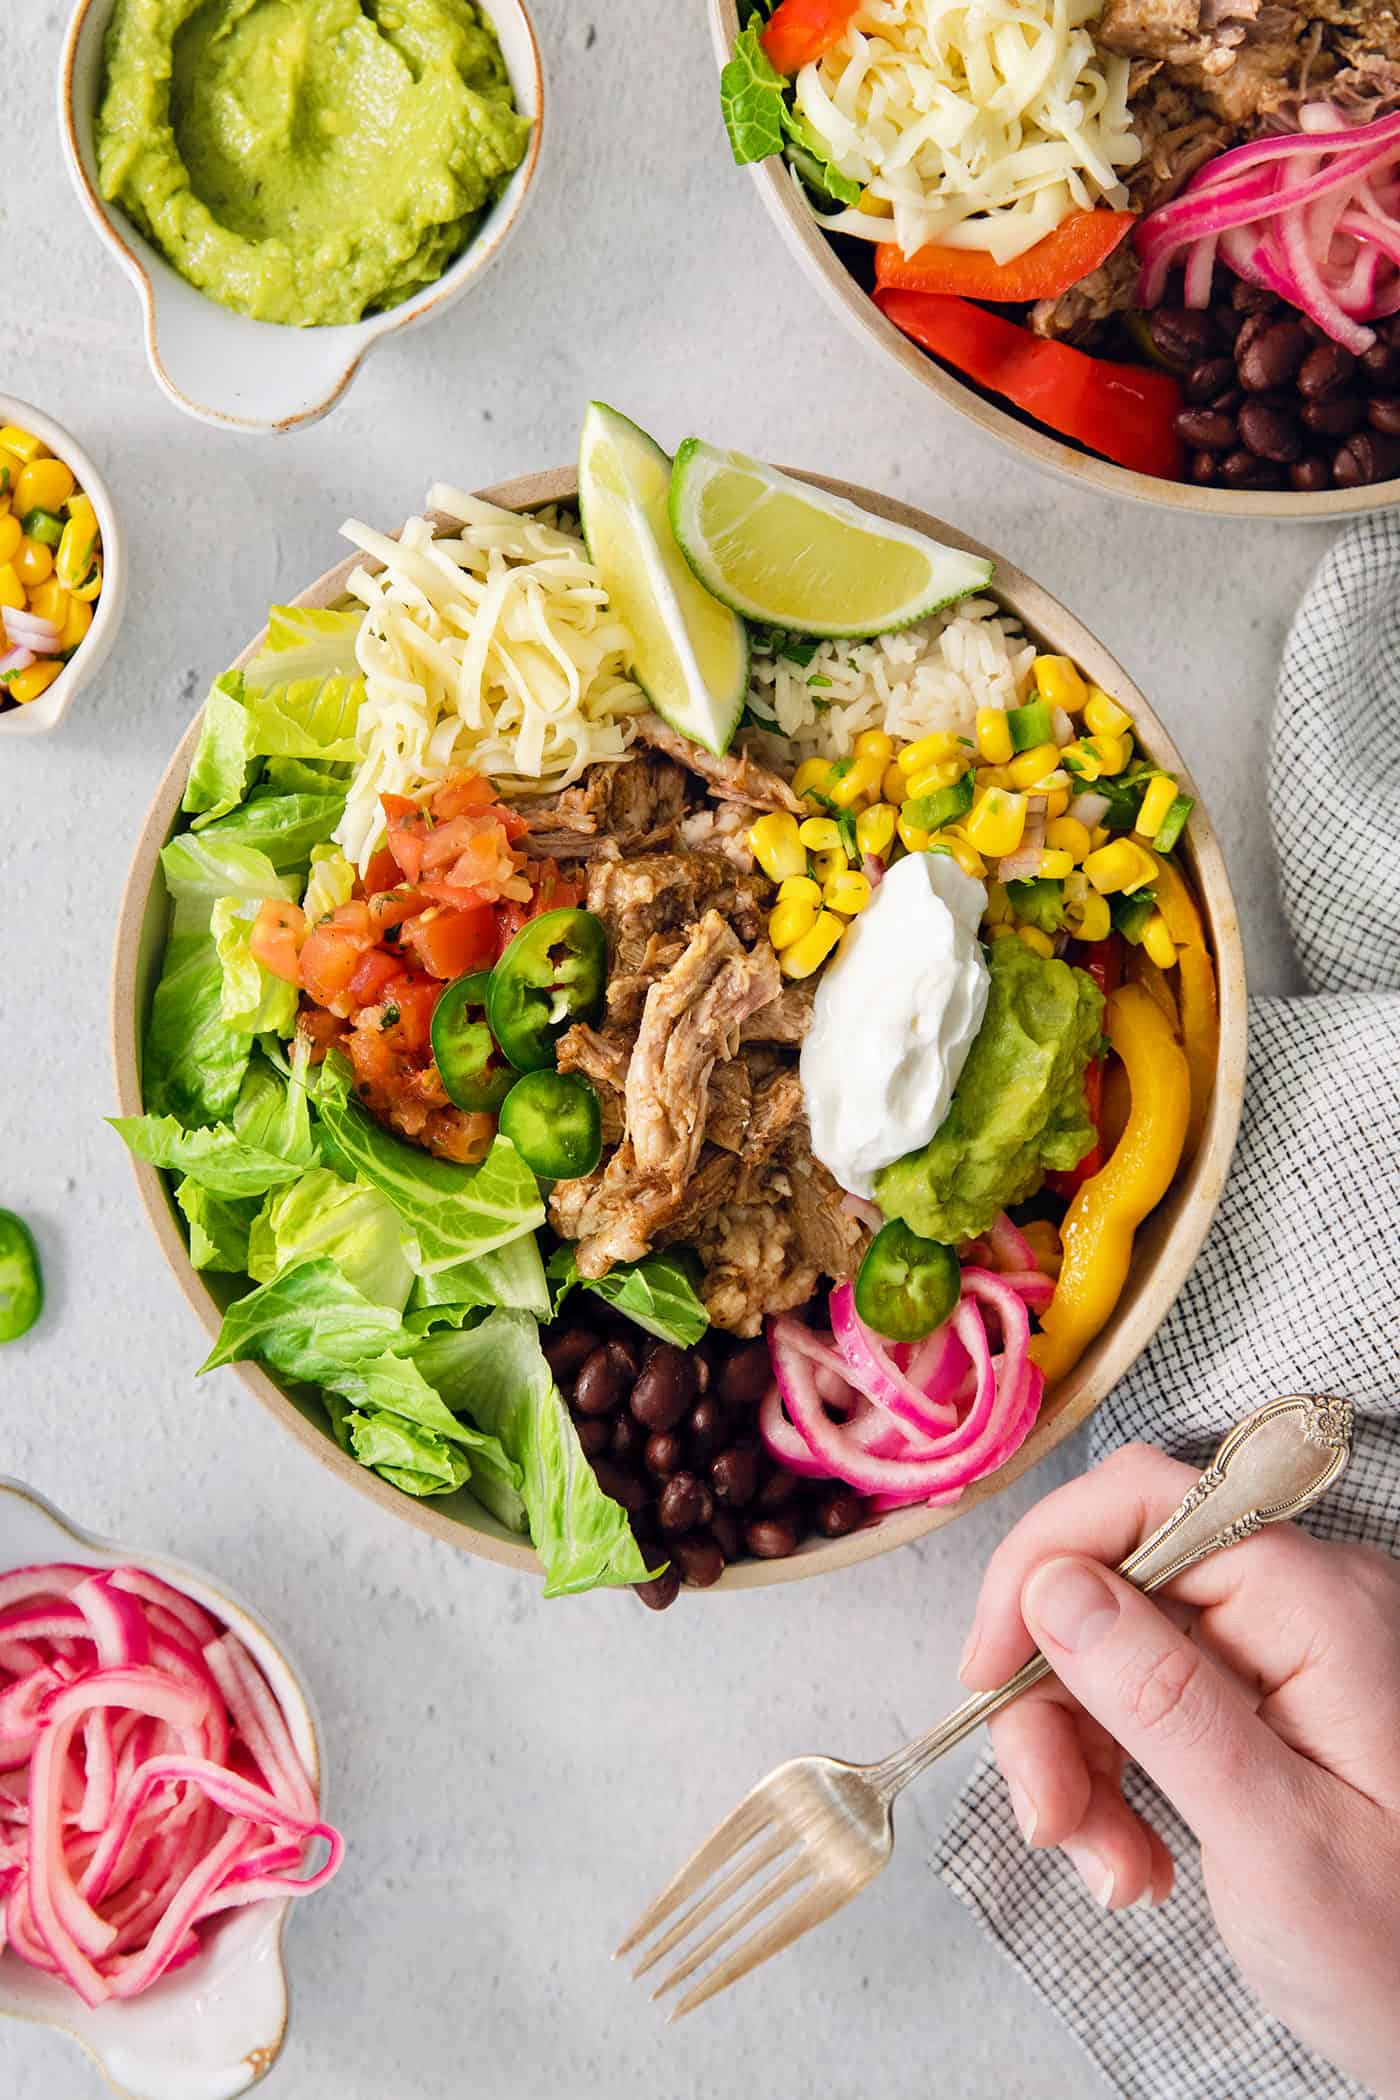 A carnitas burrito bowl topped with lime guacamole, and sour cream is ready to eat.